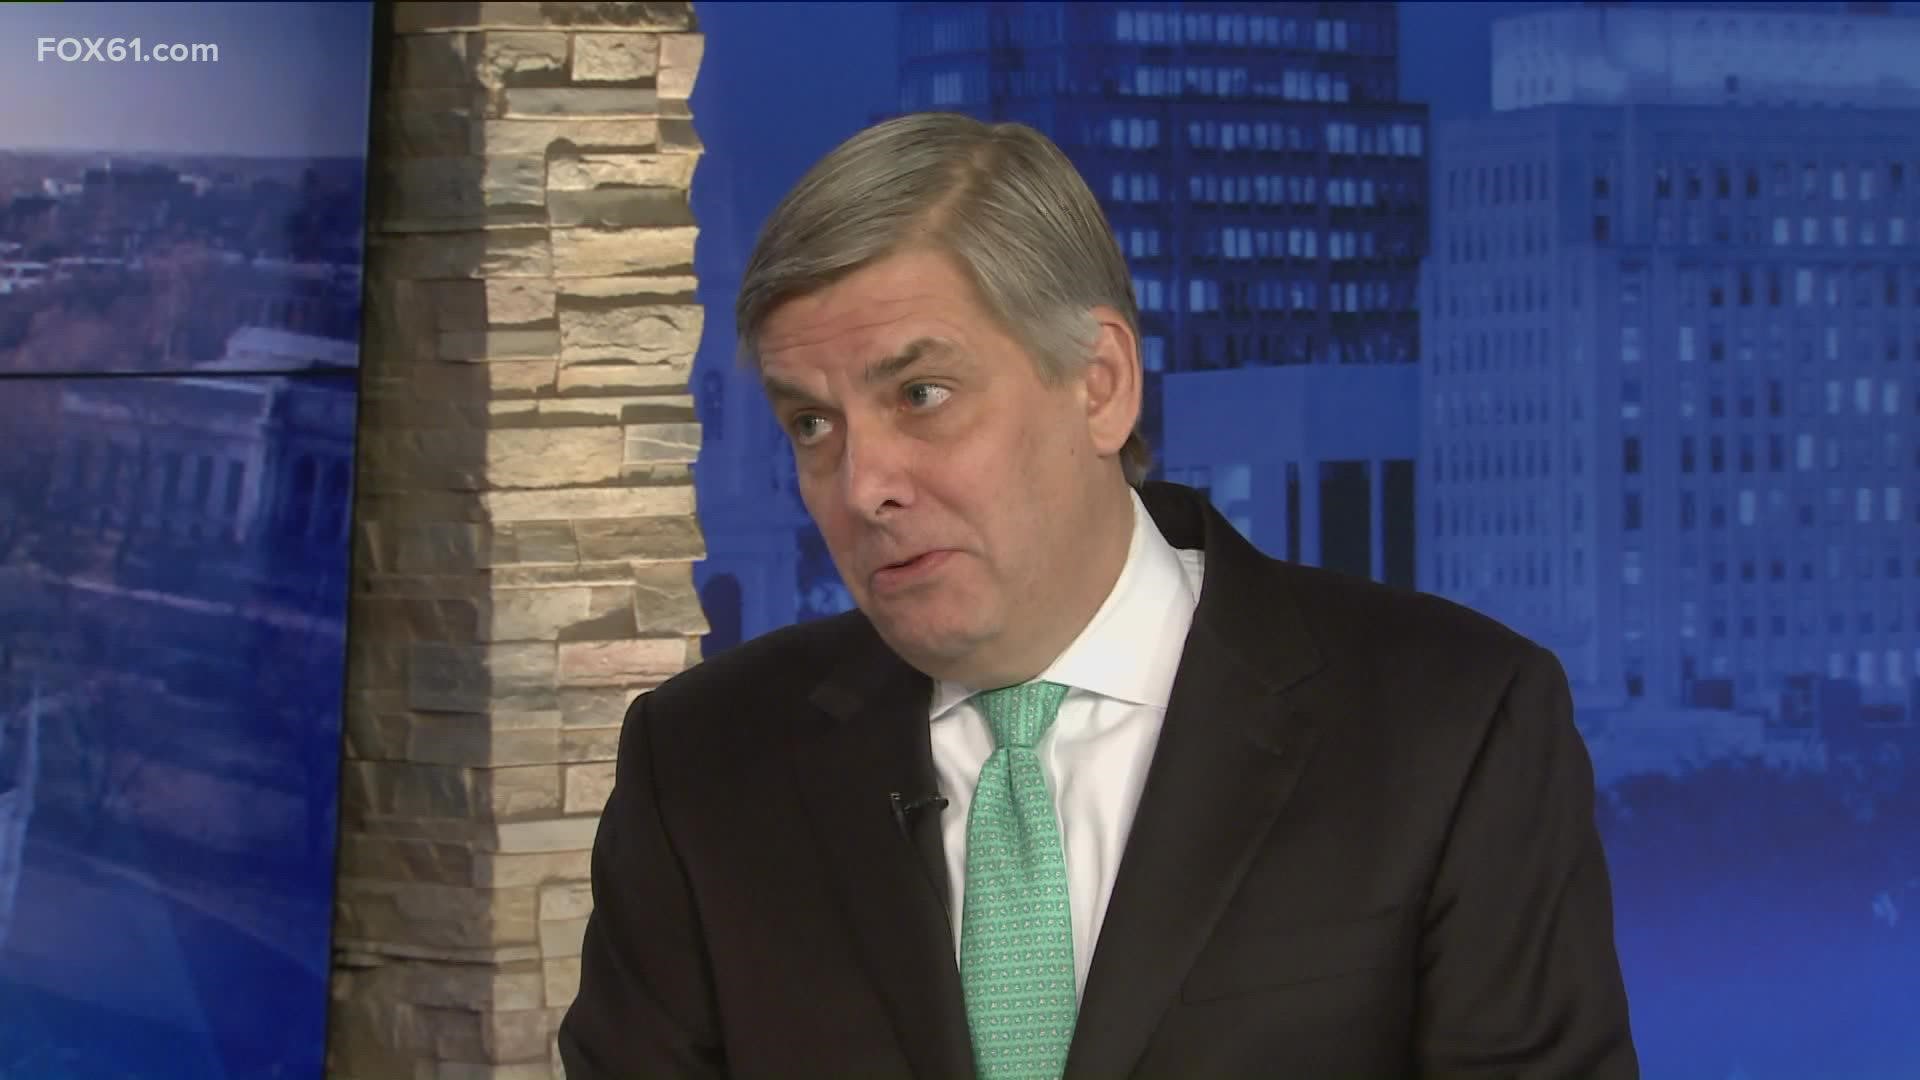 Stefanowski has continued to be vocal about issues facing Connecticut and critical of Lamont's performance for the past few years.